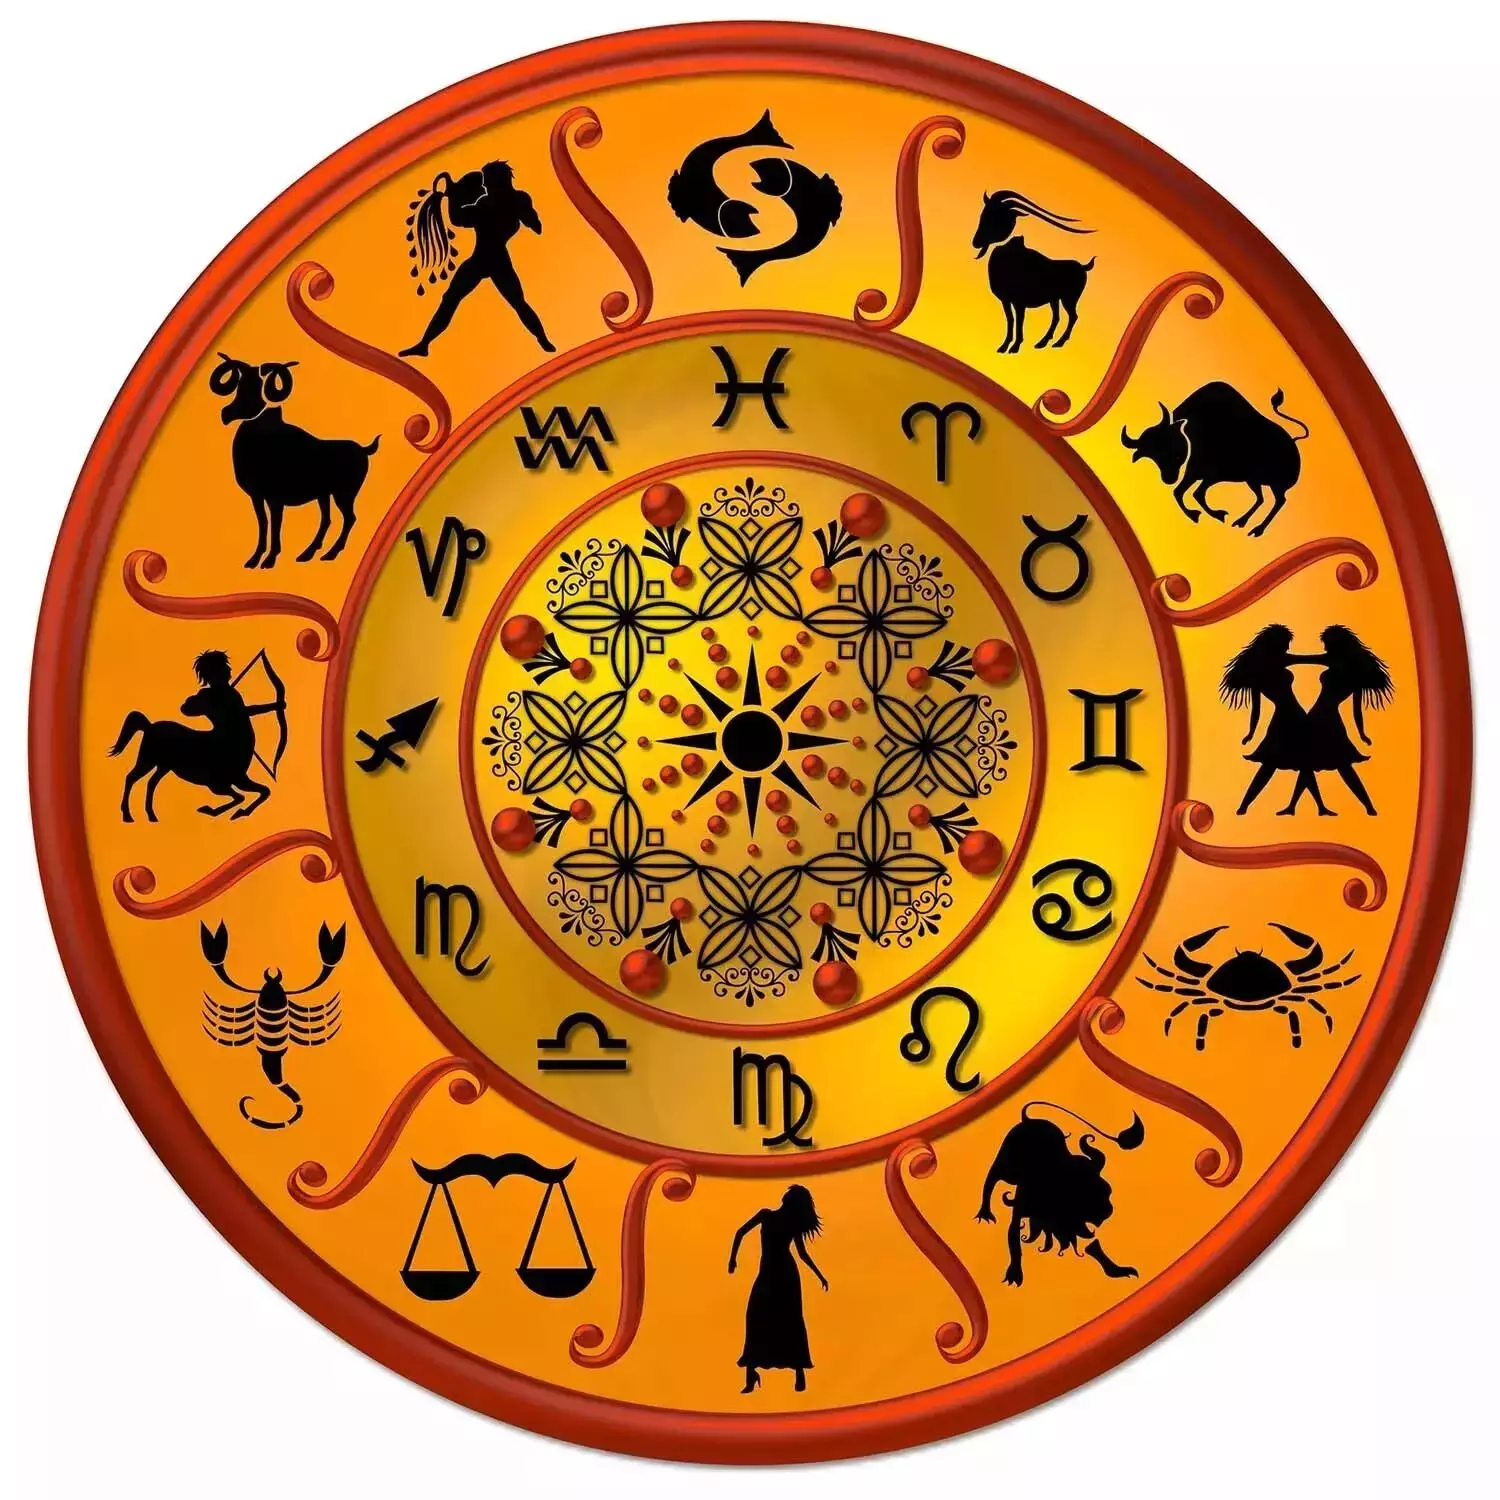 19 February – Know Your Todays Horoscope